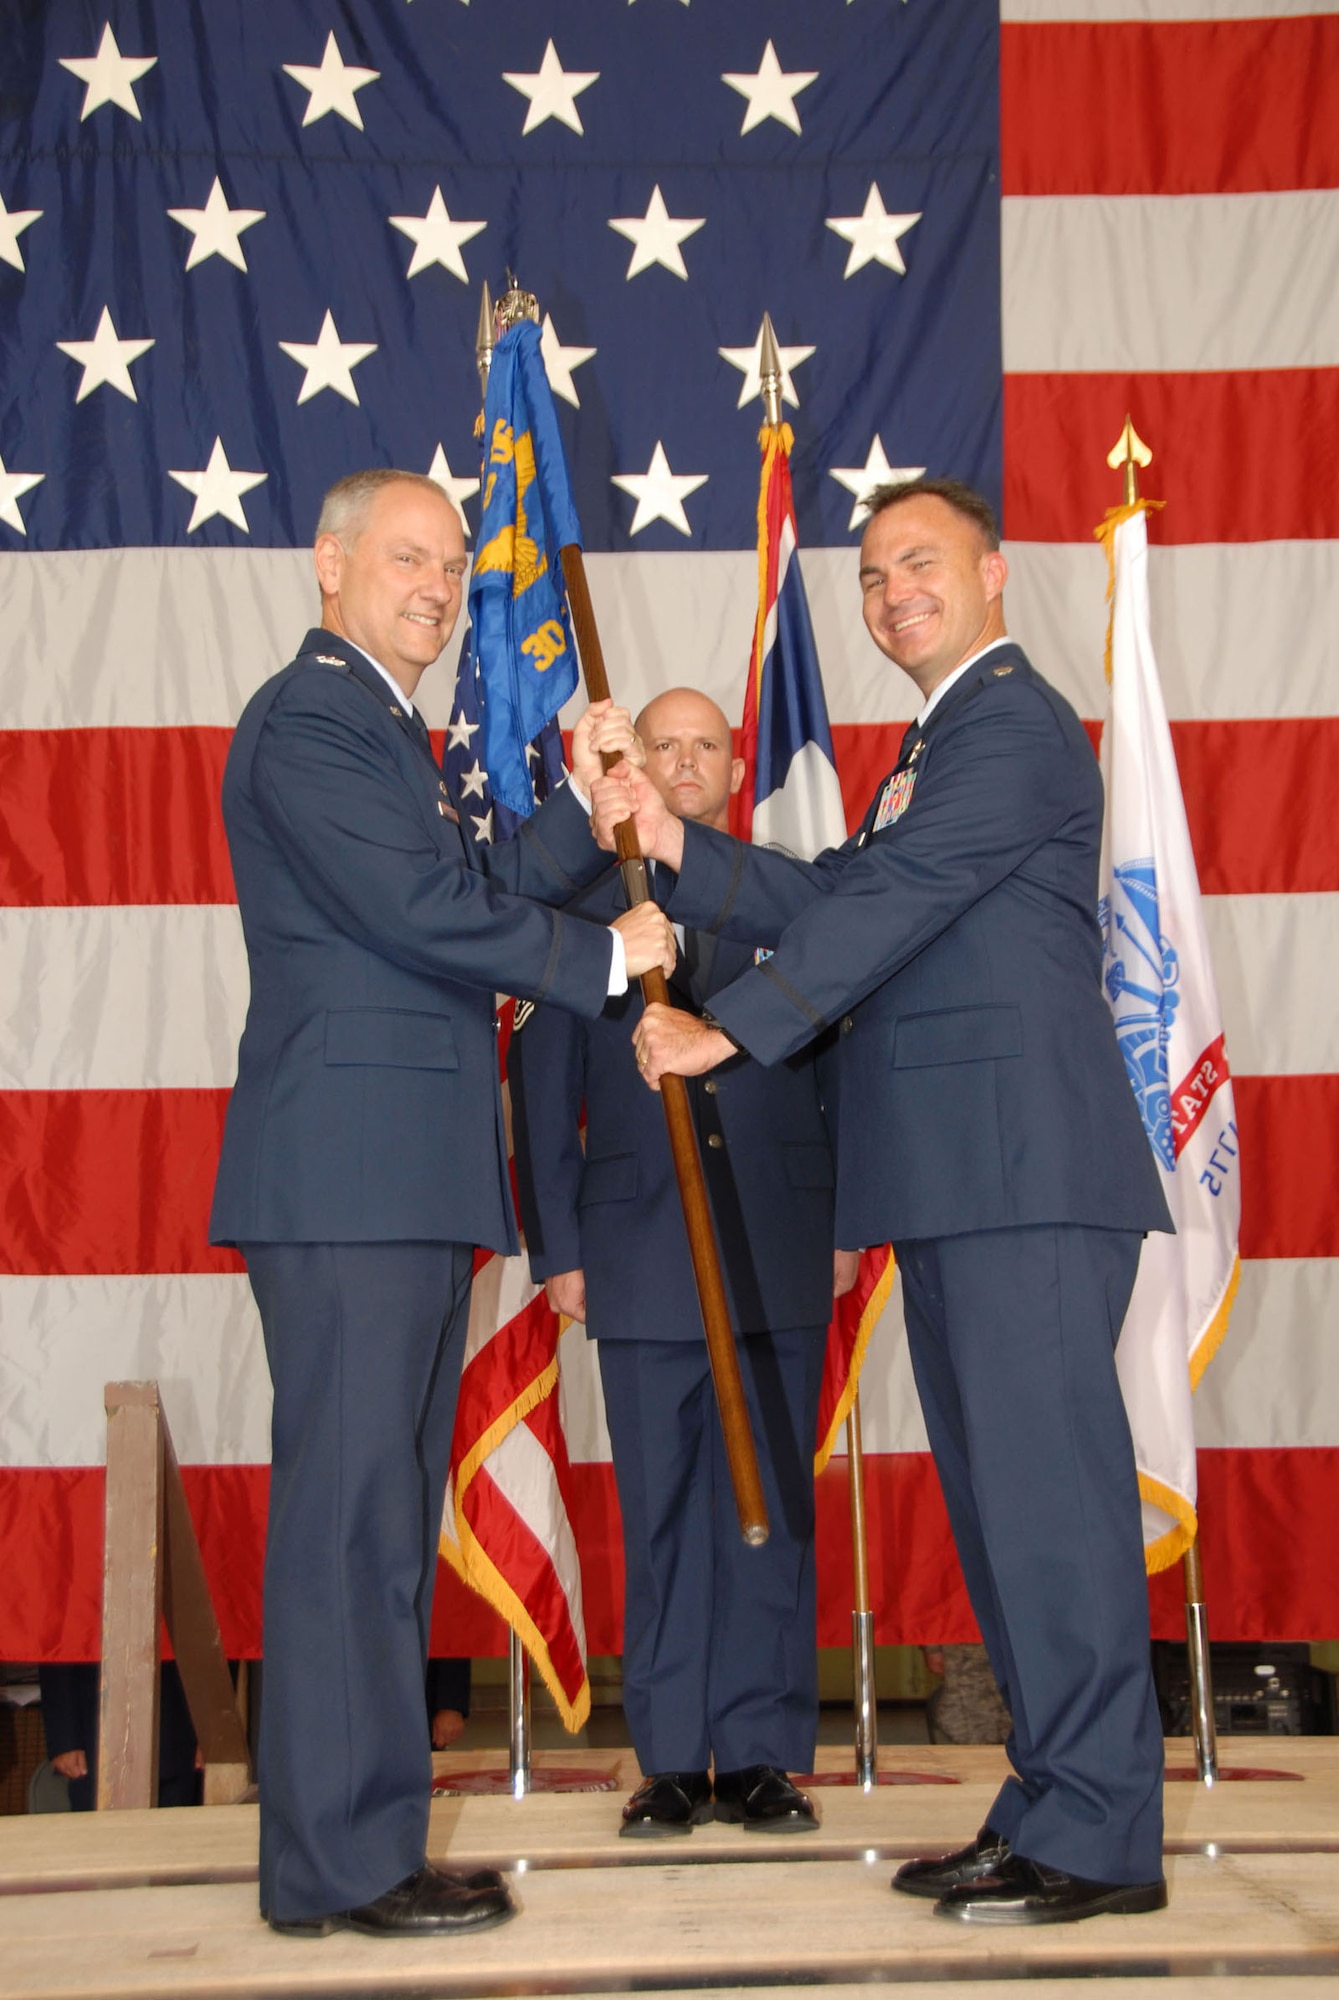 Lt Col. Eric Mayheu (right) assumes command of the 30th Airlift Squadron, 153 Airlift Wing, Wyoming Air National Guard, July 10. Col. David A. Kasberg, 19th operations group commander, was the ceremony's presiding officer. The 30th AS, the Air Force's first active-associate unit, welcomed it's third commander to Cheyenne, Wyo., with a week of command related activities culminating with the change of command. (U.S. Air Force photo by Senior Master Sgt. Paul Mann)